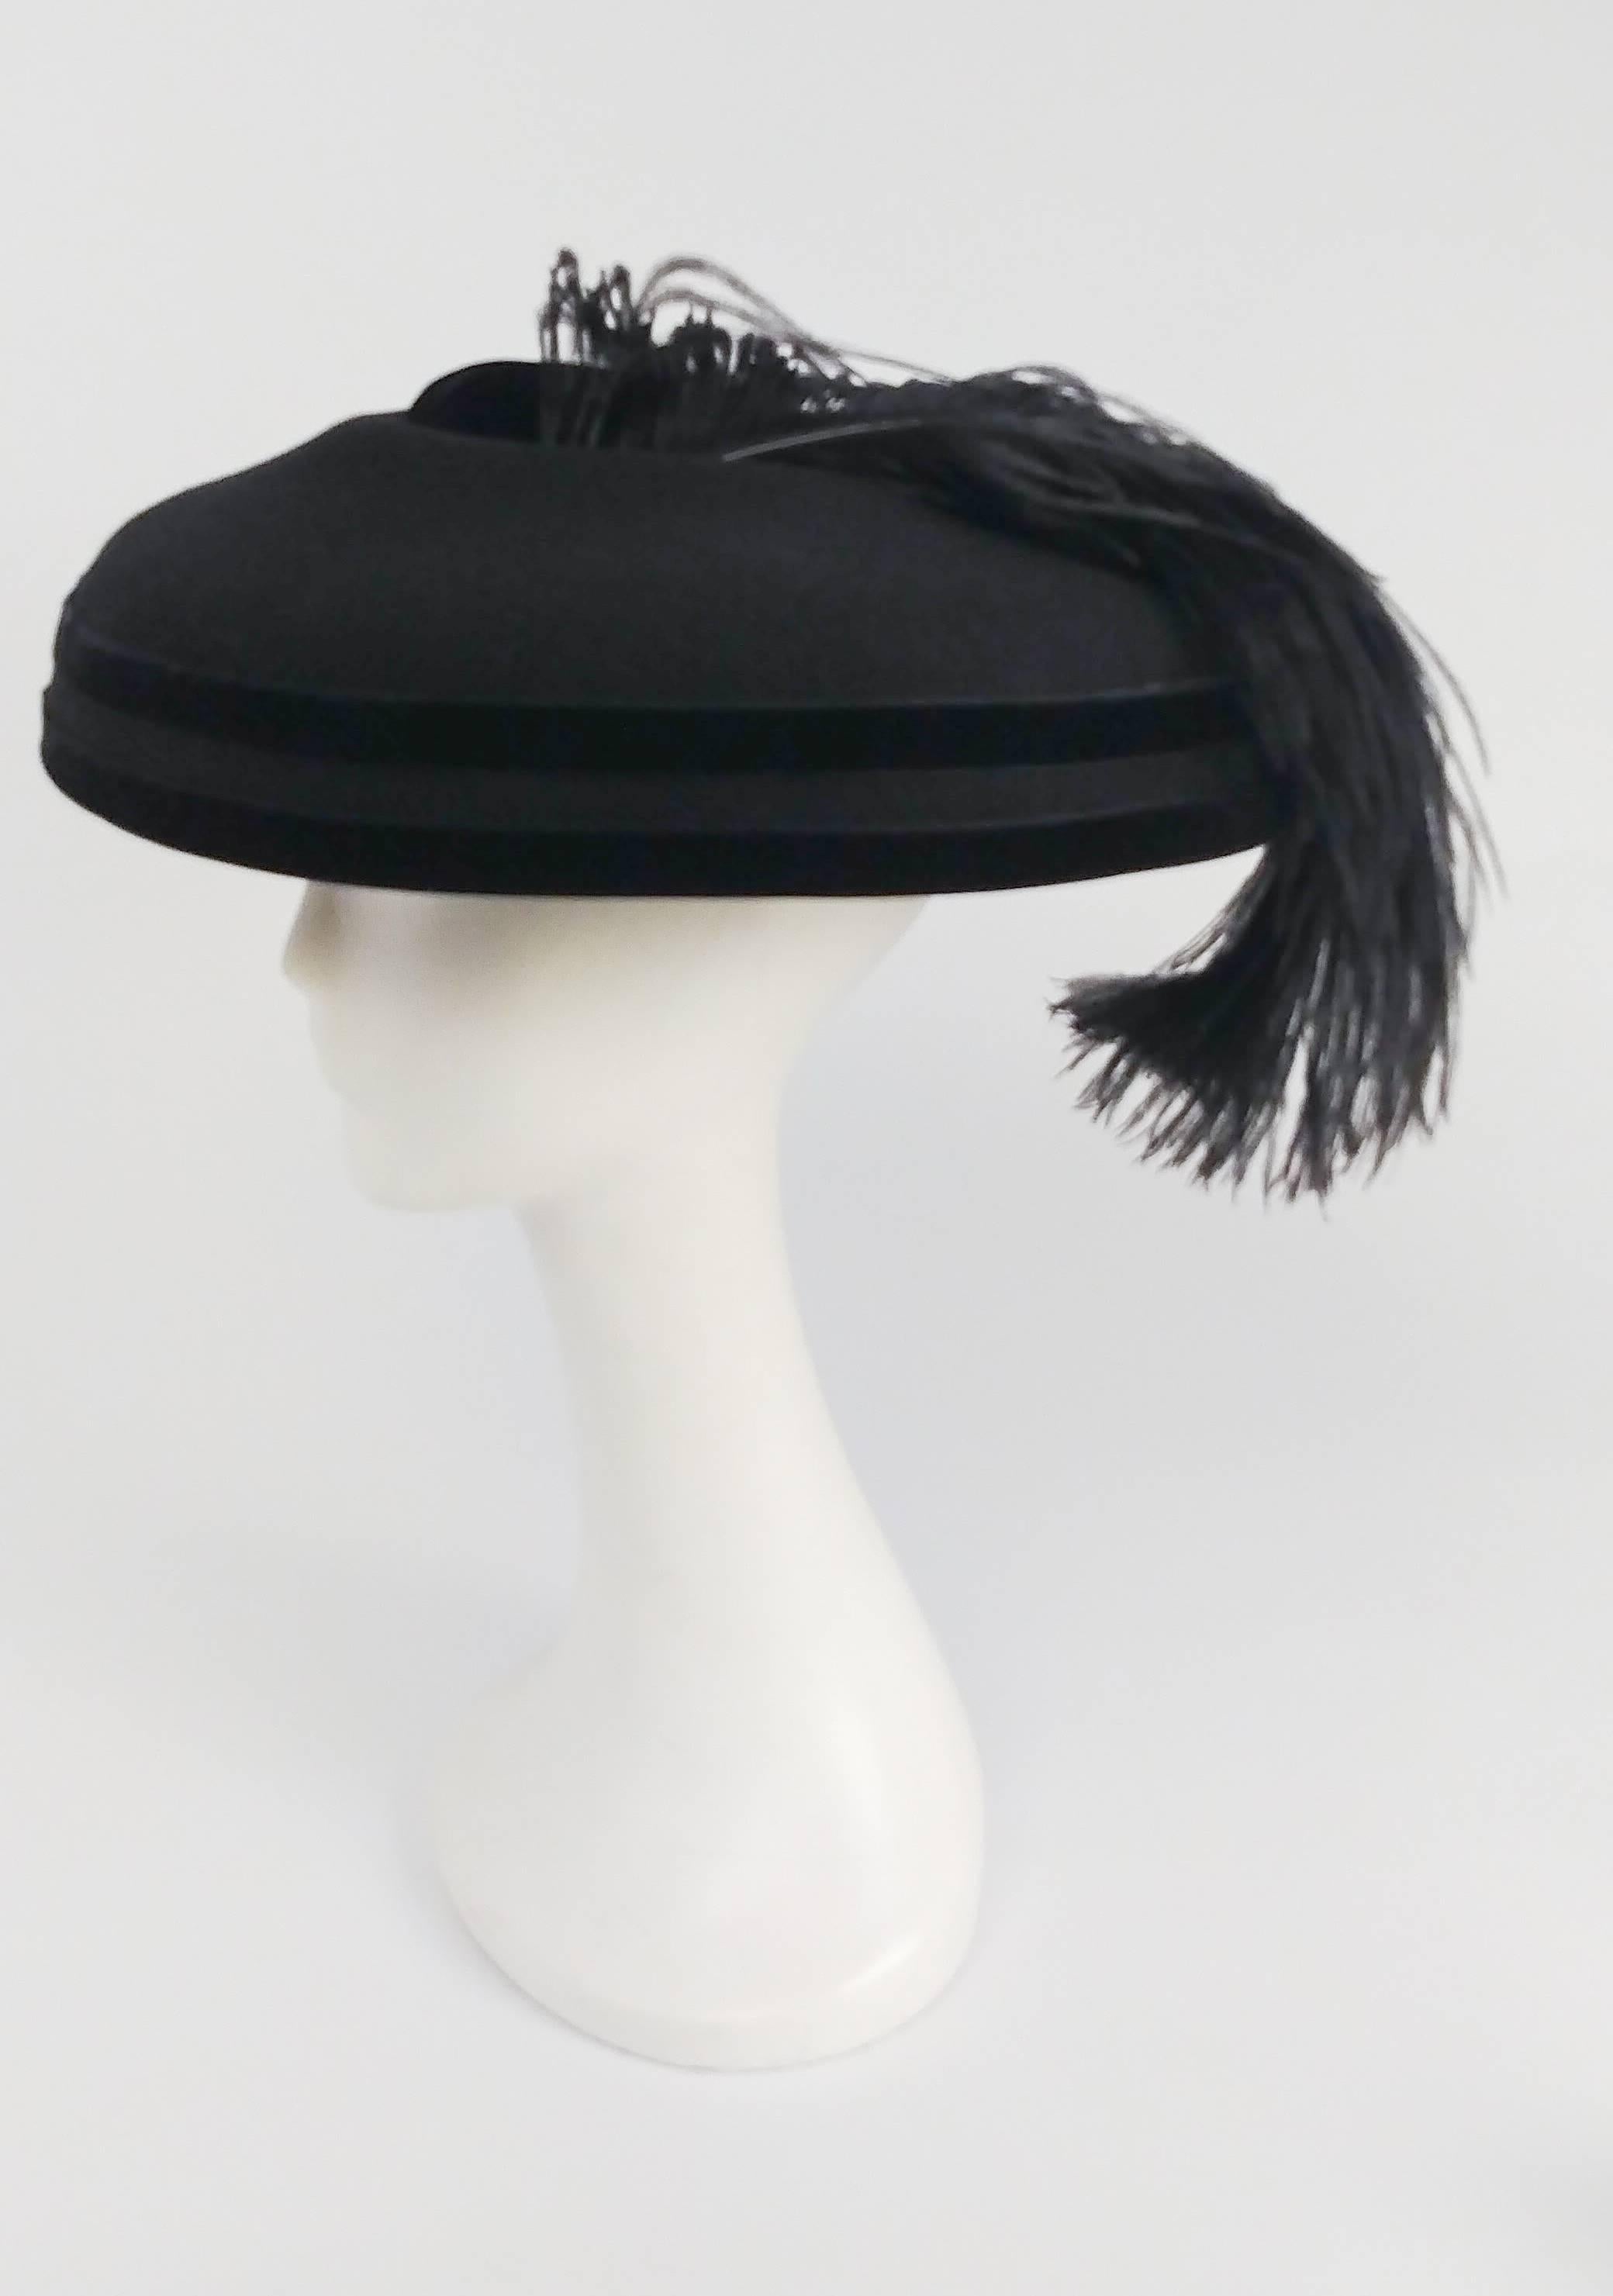 1980s Black Wool Wide Brimmed Hat w/ Feather. Two bands of velvet trim. 